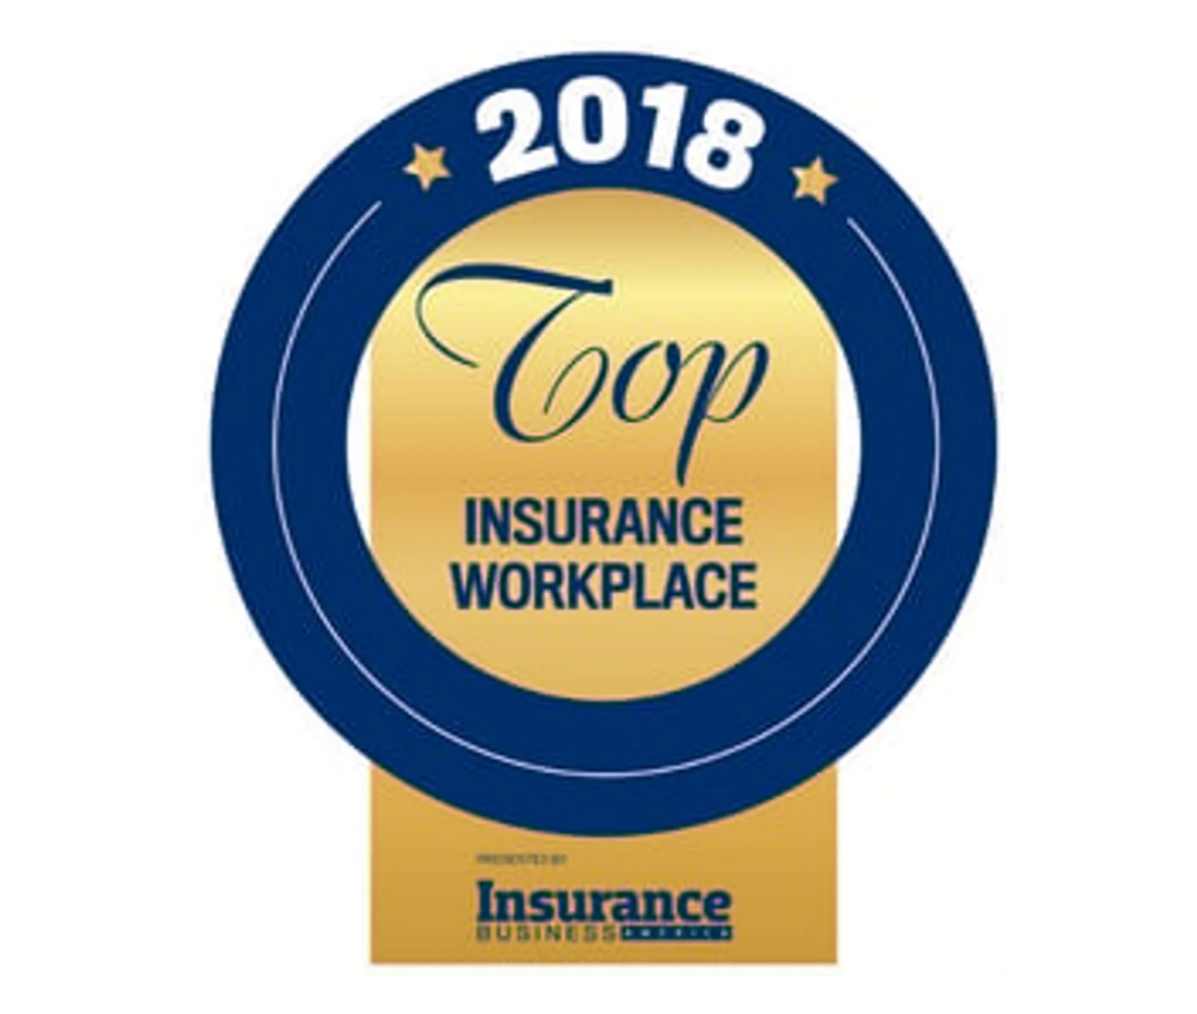 2018 Top Insurance Workplace